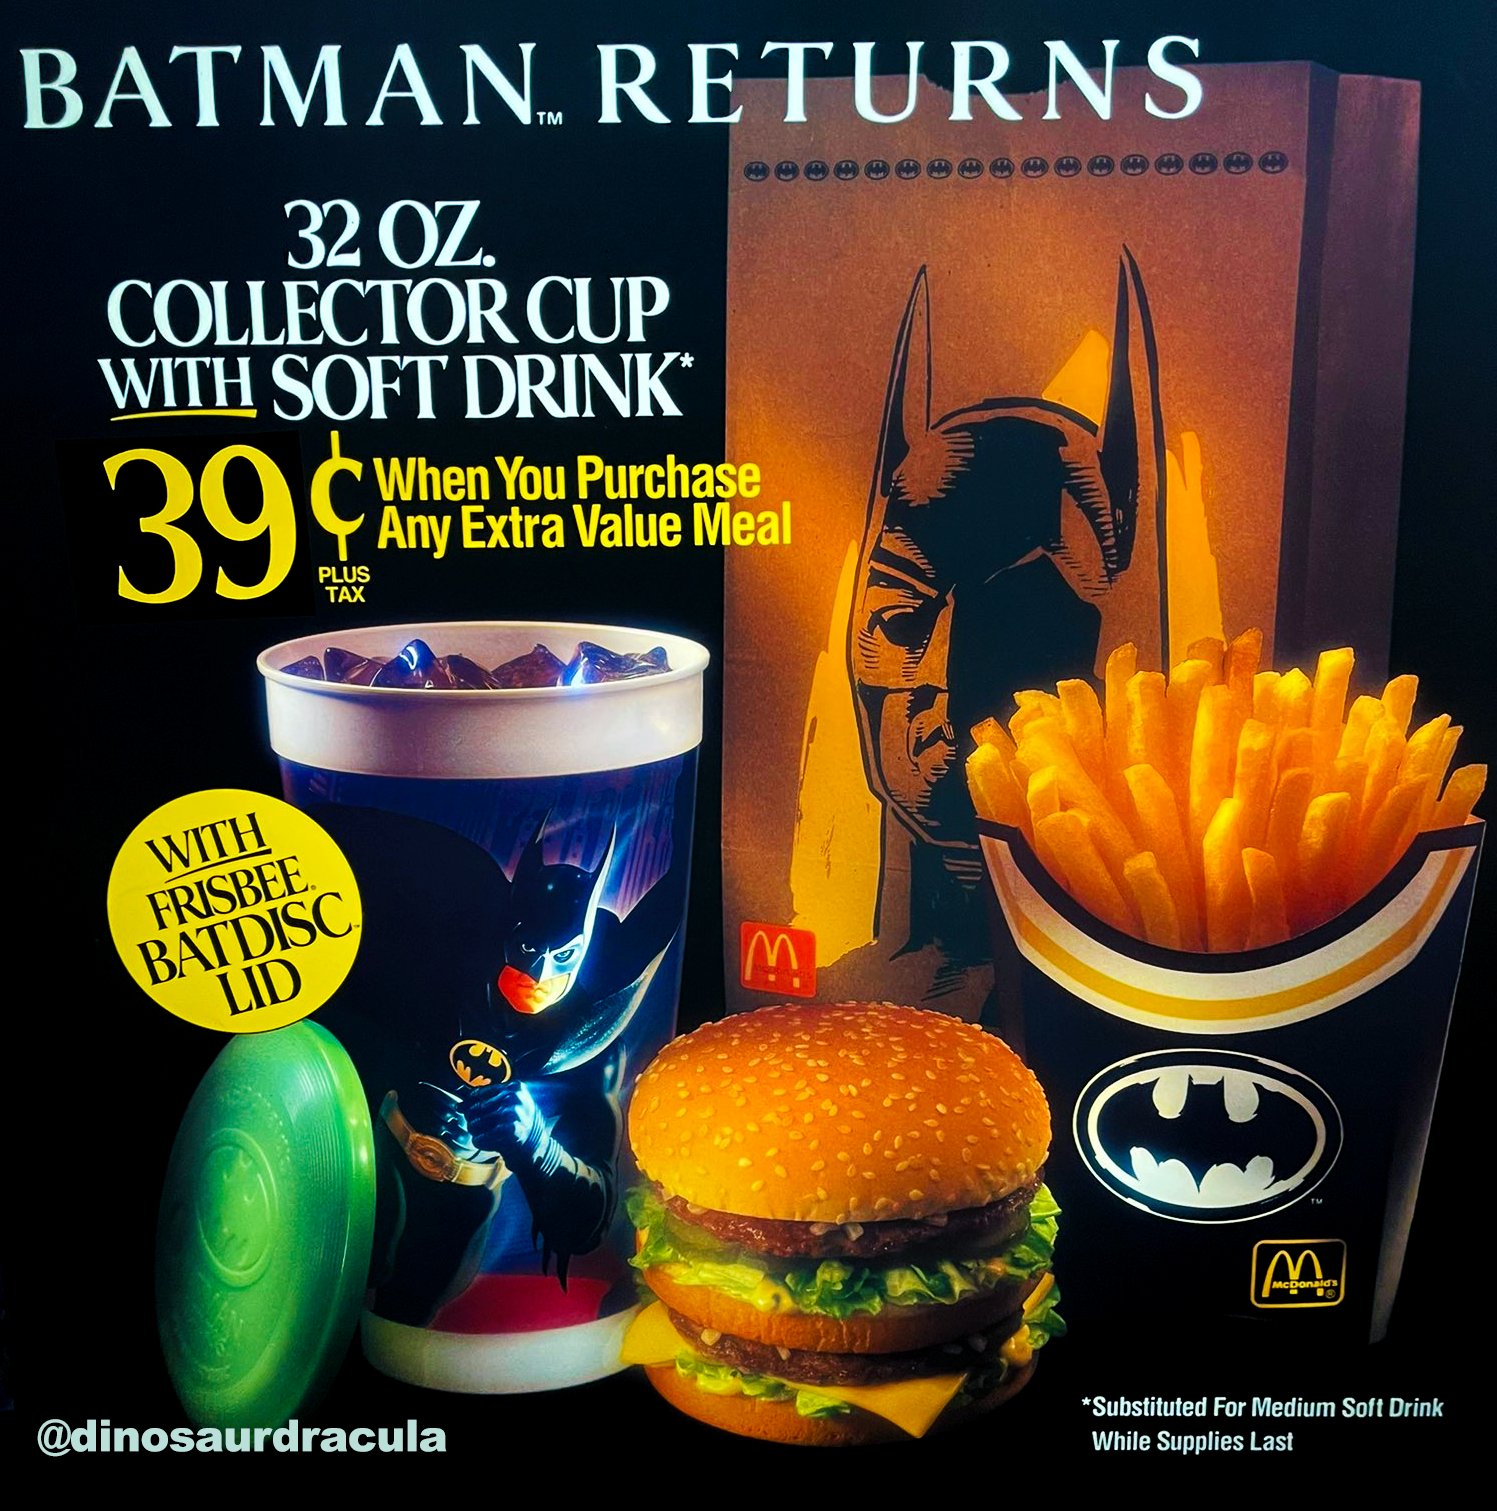 Viento fuerte promedio Llorar Dinosaur Dracula on Twitter: "The McDonald's Batman Returns Extra Value  Meal, from 1992. Fries in a Batman-themed container, and soda in a  collector's cup topped with a "Batdisc" frisbee lid. This was